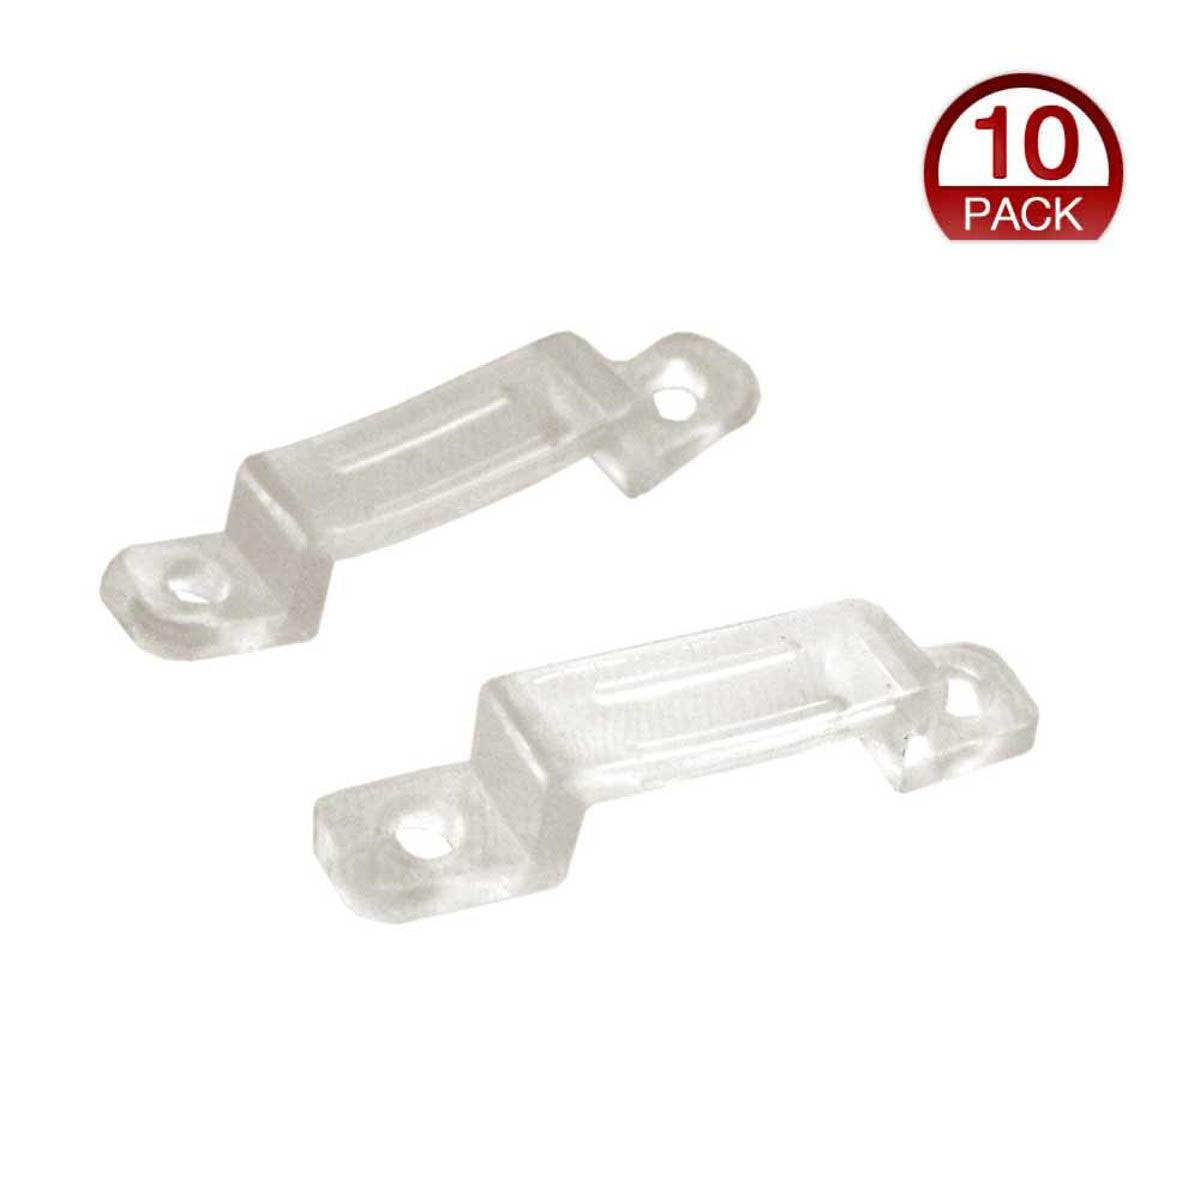 Mounting Clips for Wet Location Strip Lights, Pack of 10